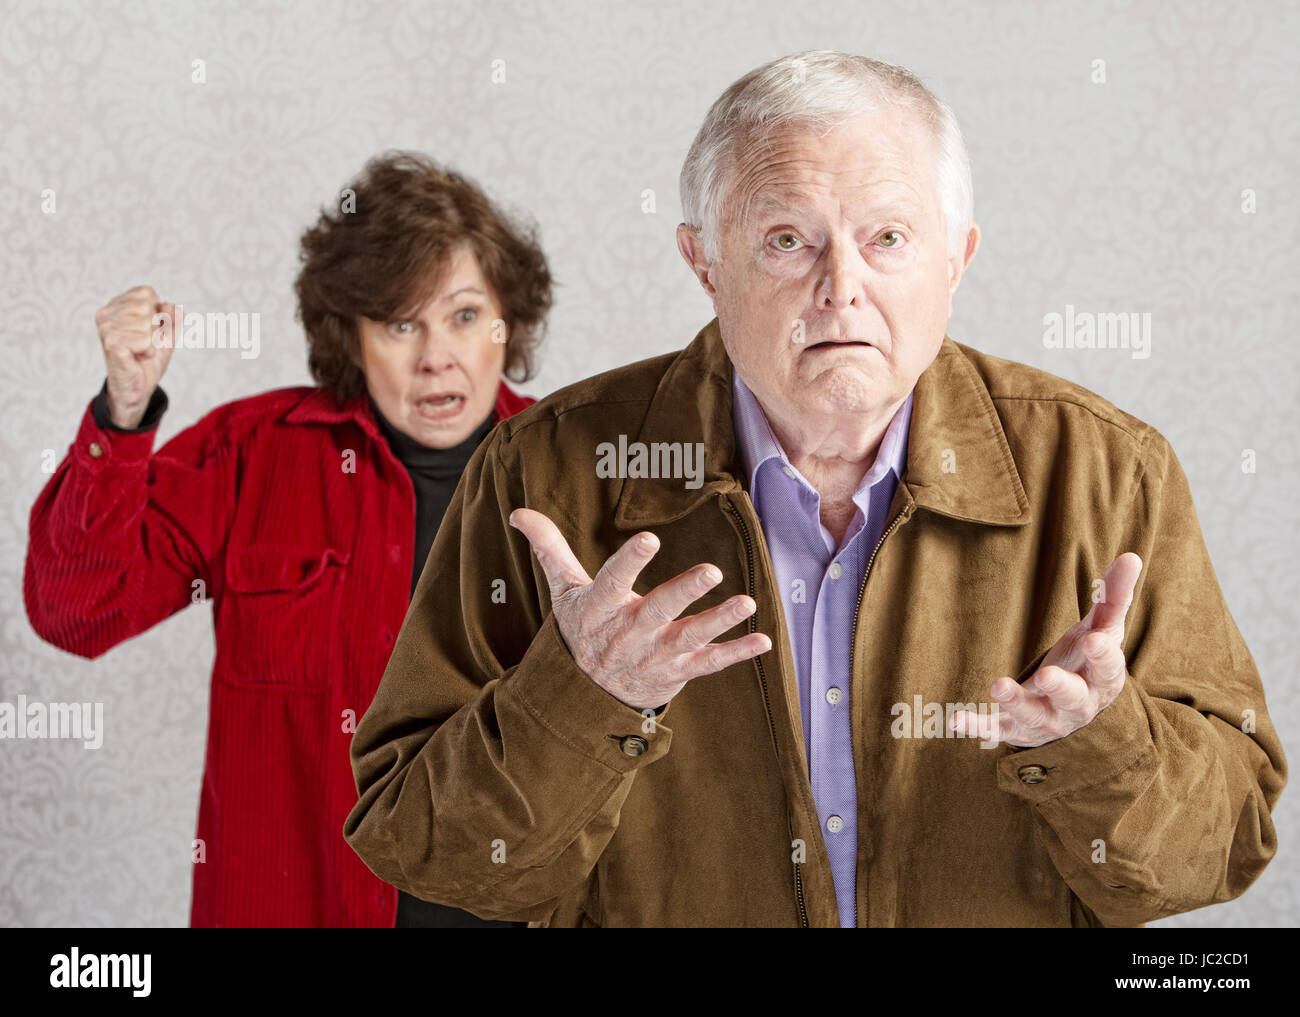 Confused elderly man with angry older woman Stock Photo